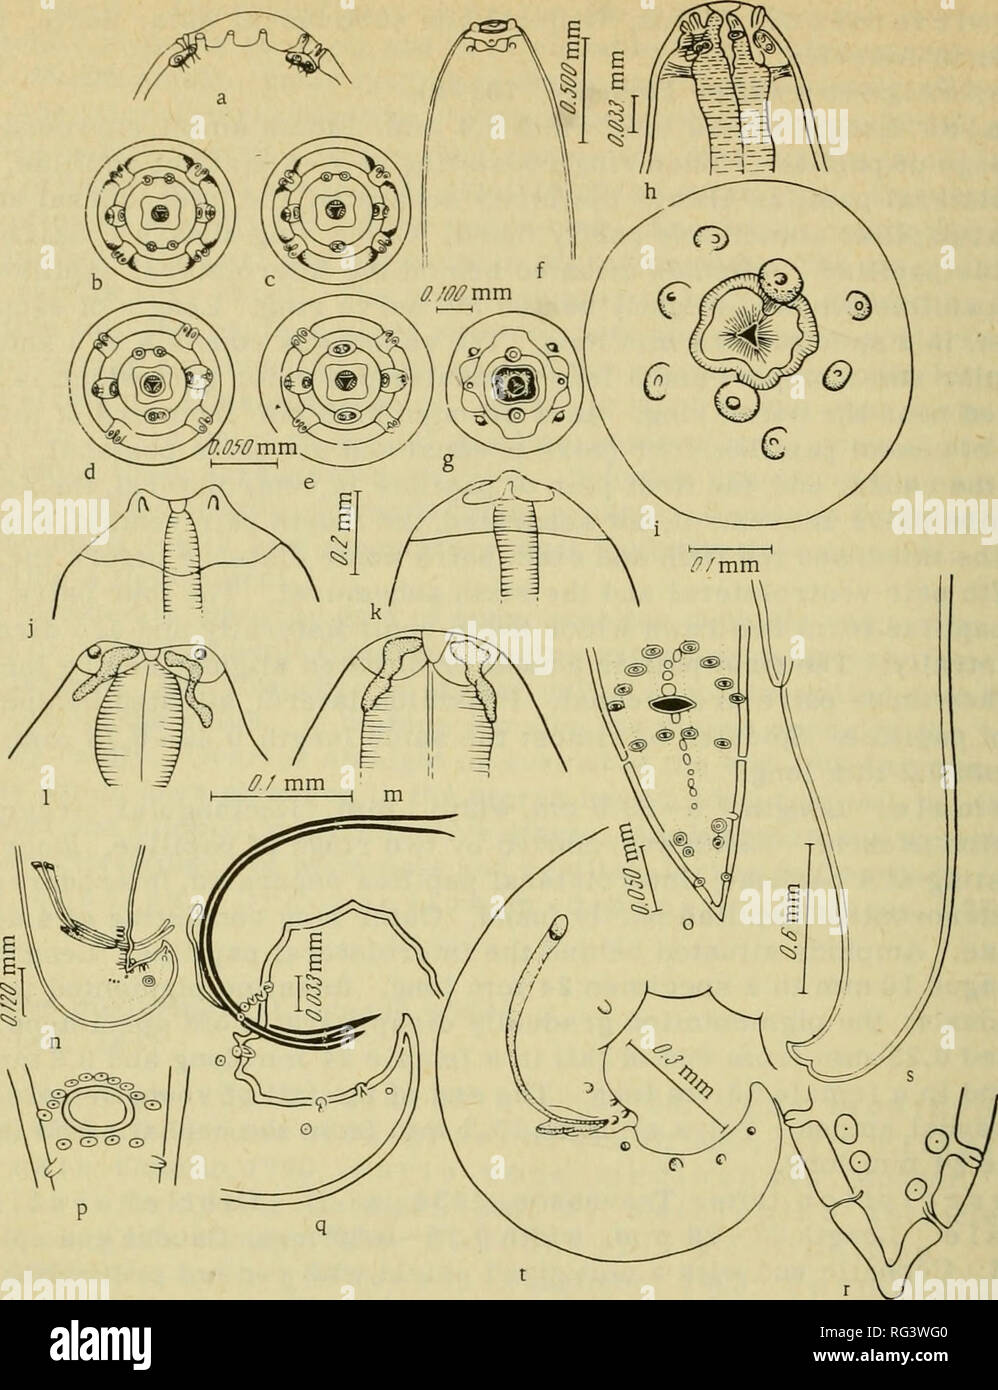 . Camallanata of animals and man and diseases caused by them = Kamallanaty zhivotnykh i cheloveka i vyzyvaemye ime zabolevaniya. Helminths; Worms as carriers of disease. (245). FIGURE 143. Dracunculus medinensis (Linnaeus, 1758). Cephalic ends: a—e — after Moorthy, 1937; f,g — after Skrjabin and Shul'ts, 1931; h — after Chitwood and Chitwood, 1950; i—m — after Travassos, 1934. Caudal ends: n, ? — after Moorthy, 1937; q,r — after Chitwood and Chitwood, 1950; s, t — after Travassos, 1934; p — region of cloaca — after Chitwood and Chitwood, 1950. Female. Length 465 —490 mm, width 1.5 mm. Body cyl Stock Photo